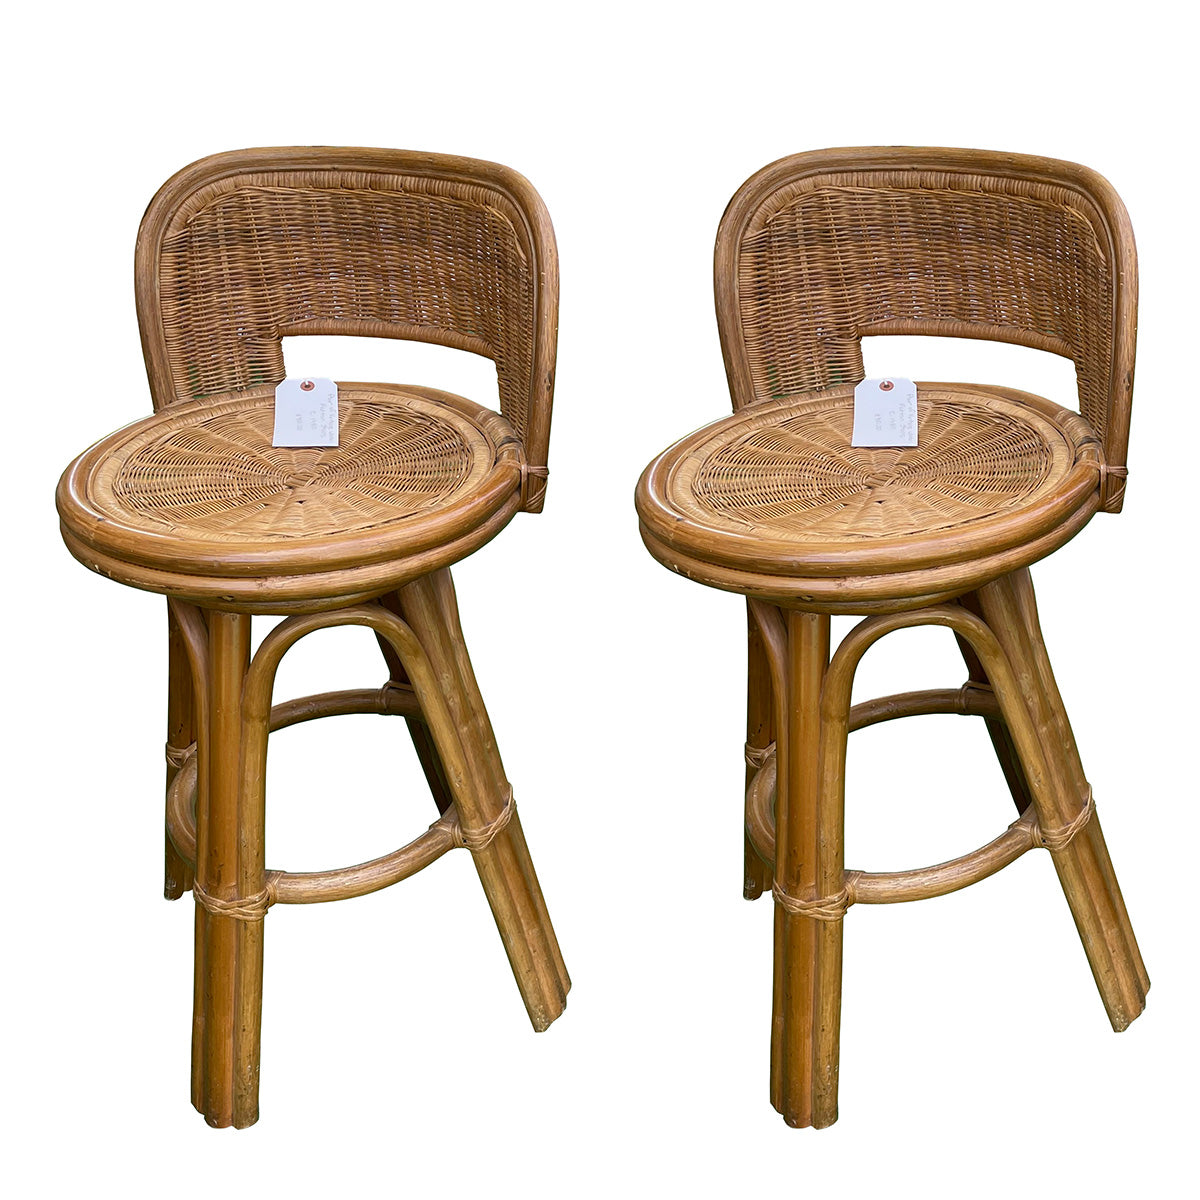 A Pair of Vintage Woven Rattan and Bamboo Stools